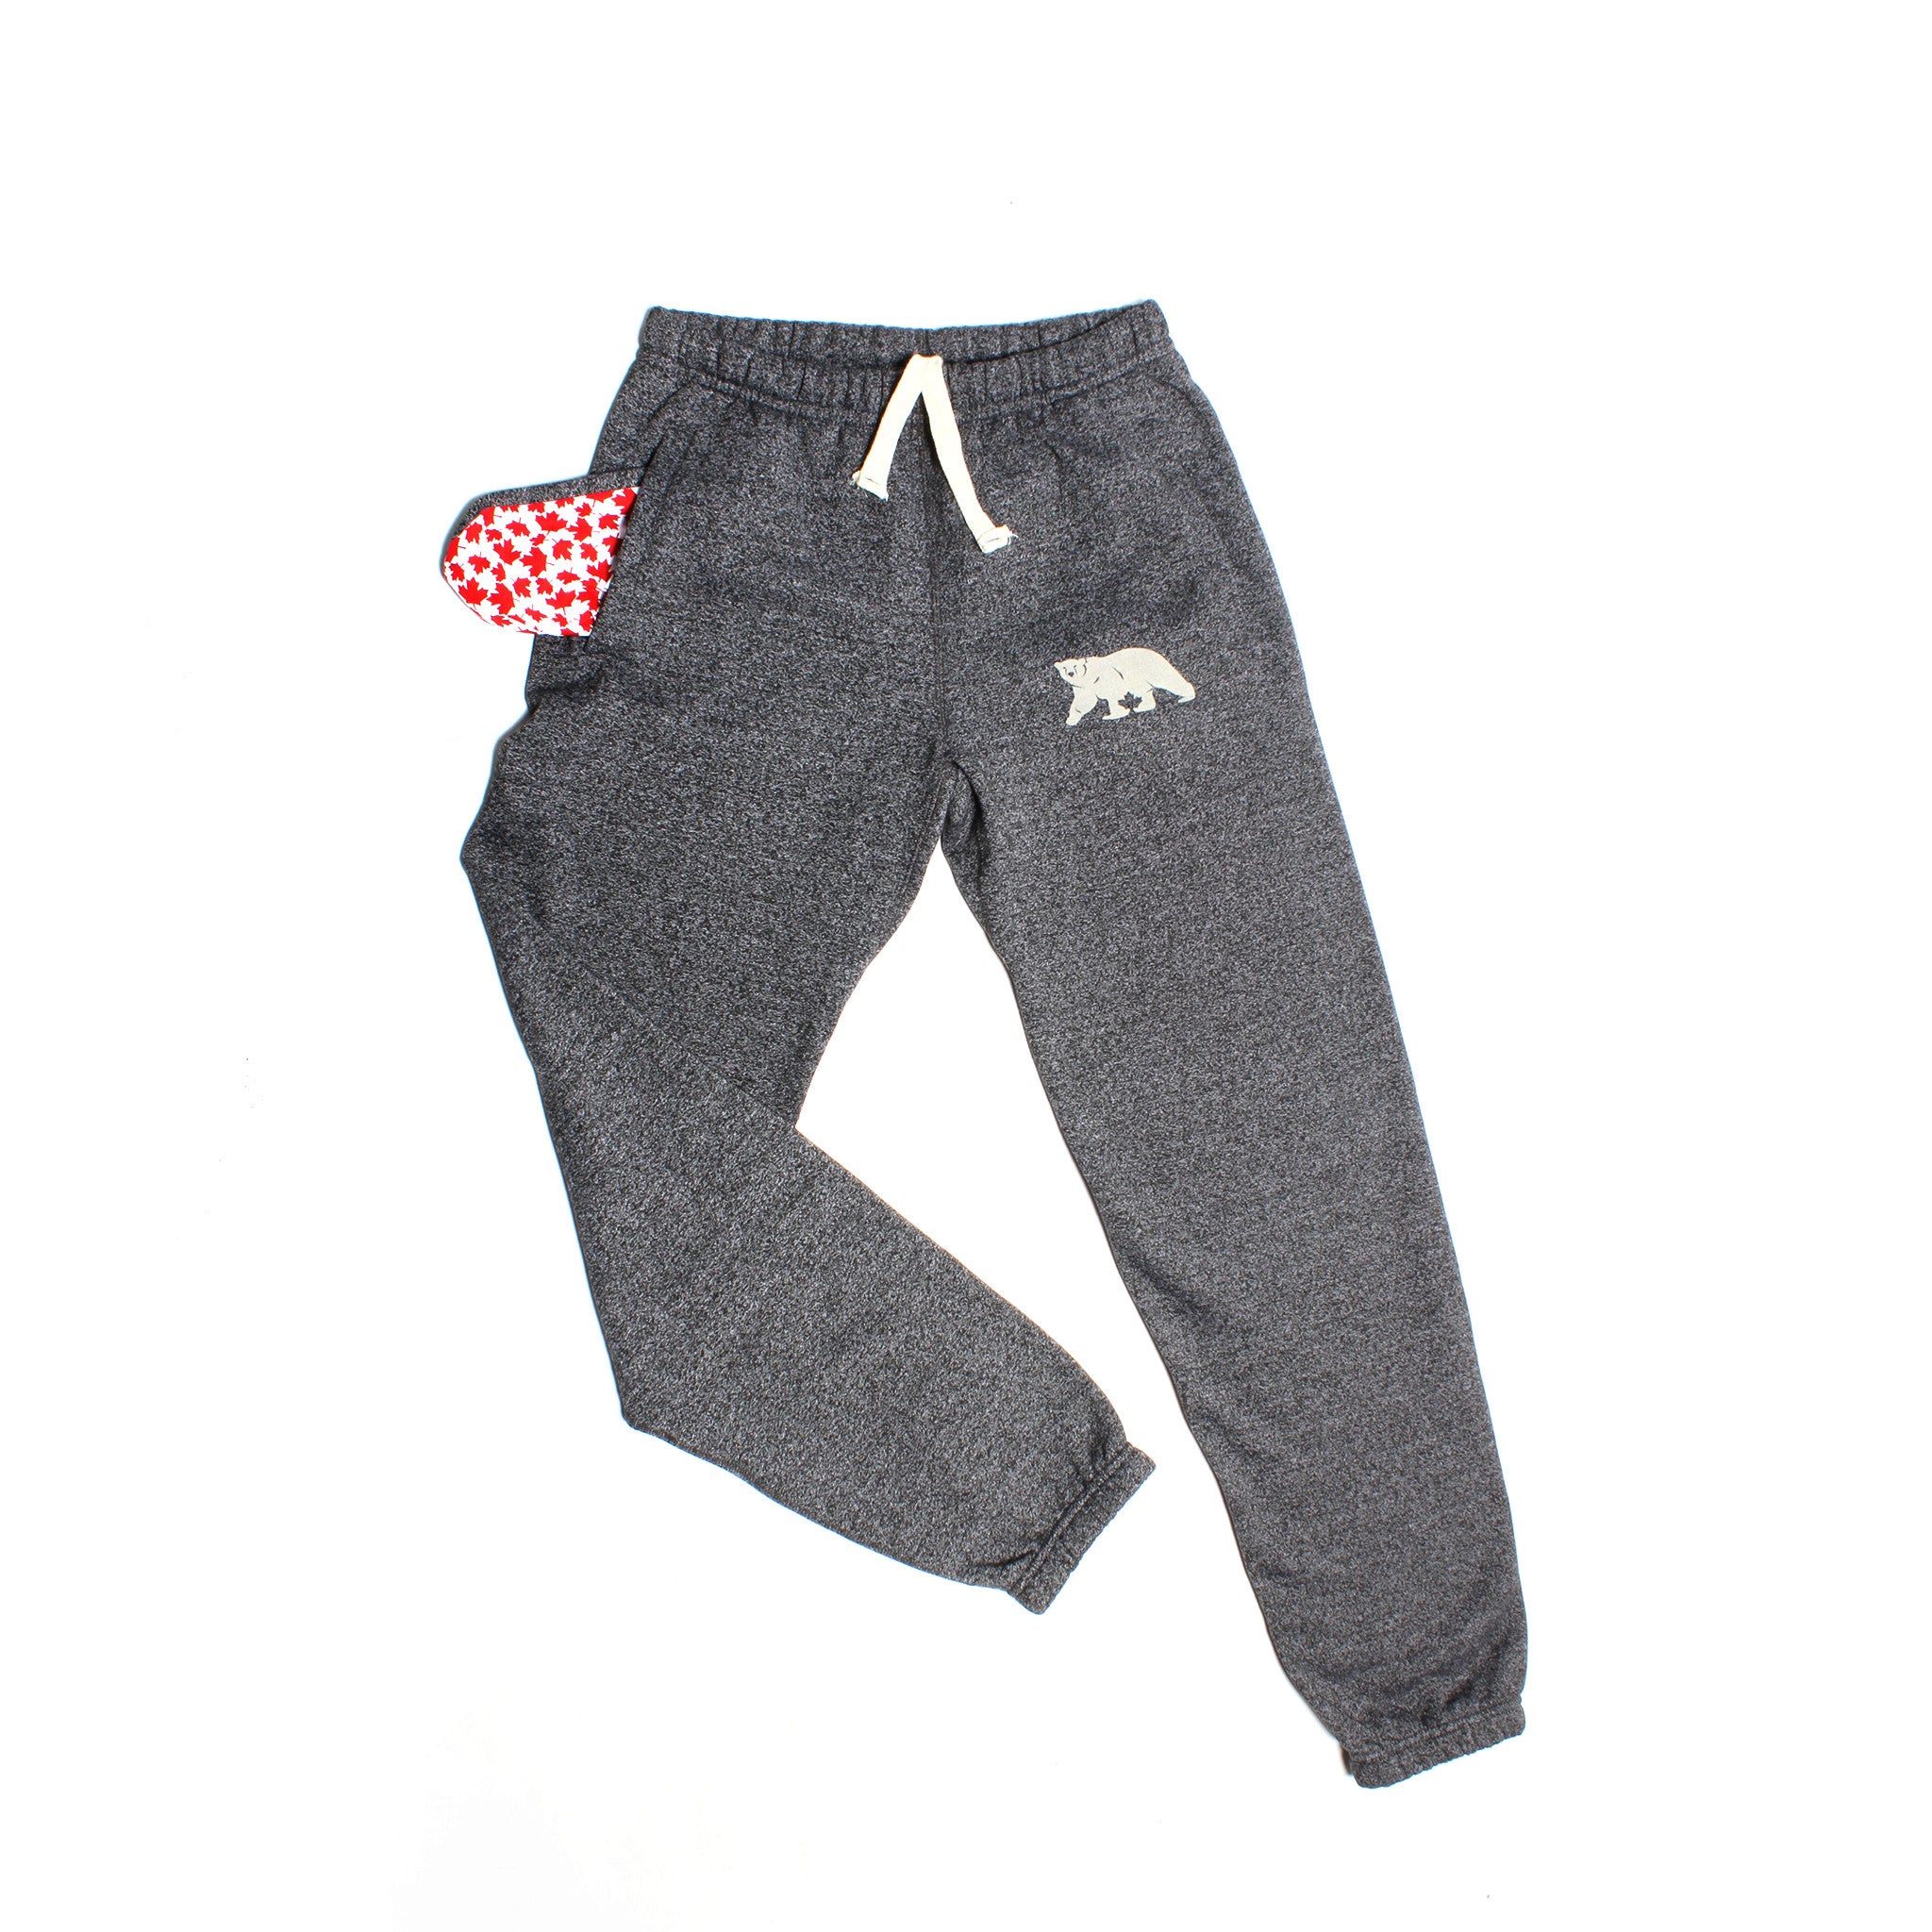 Roots Slim Cuff Sweatpant Tall | Southcentre Mall